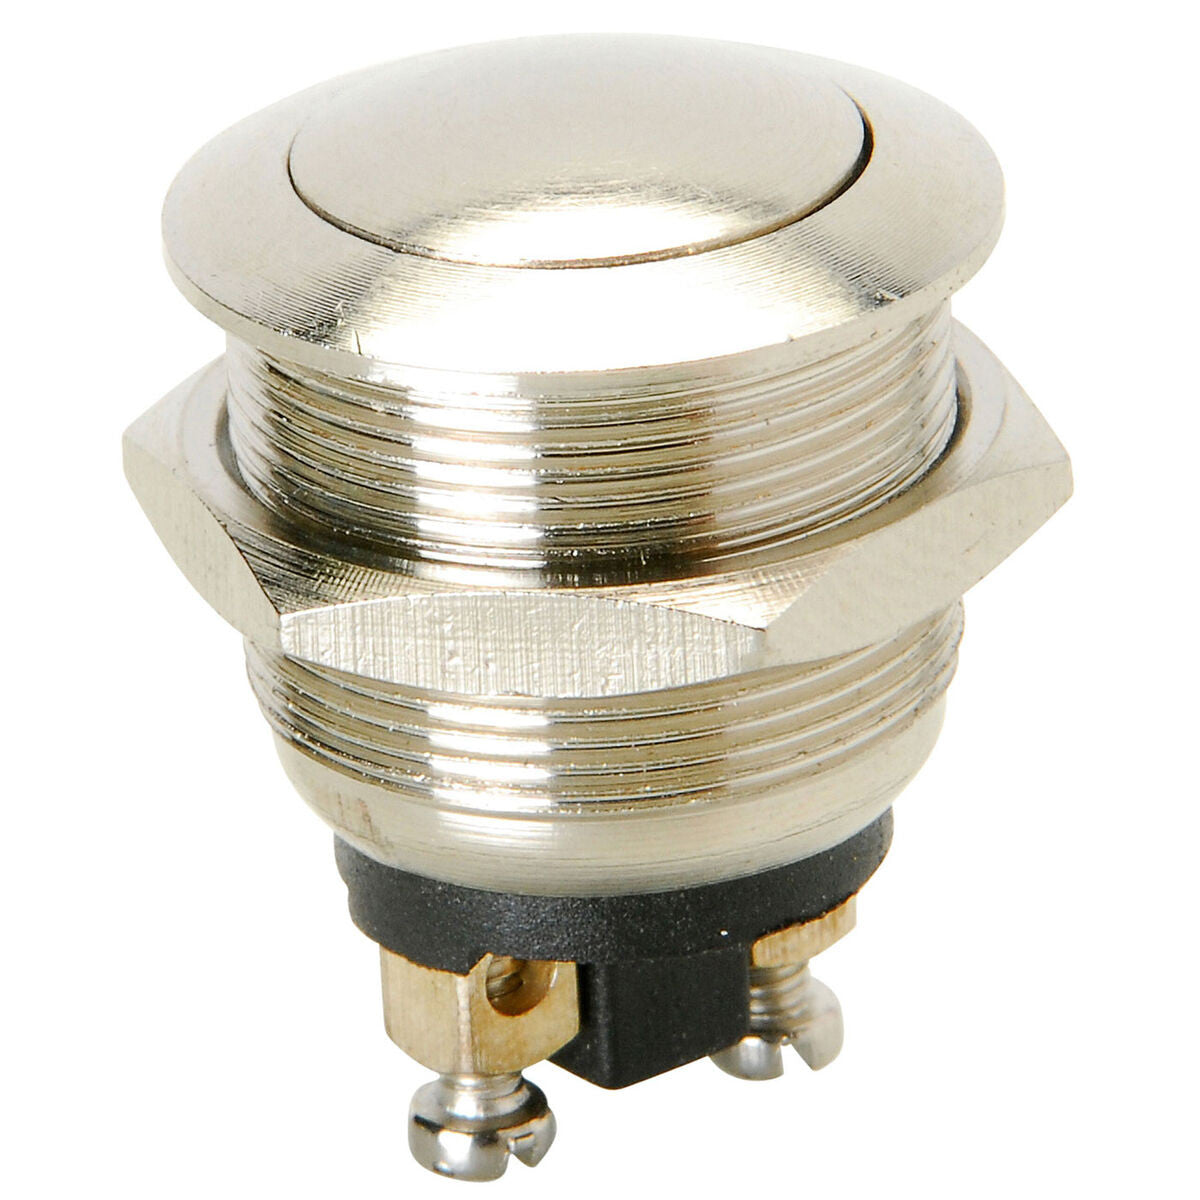 Momentary N.O. Metal Dome Push Button Switch, 4A 125V